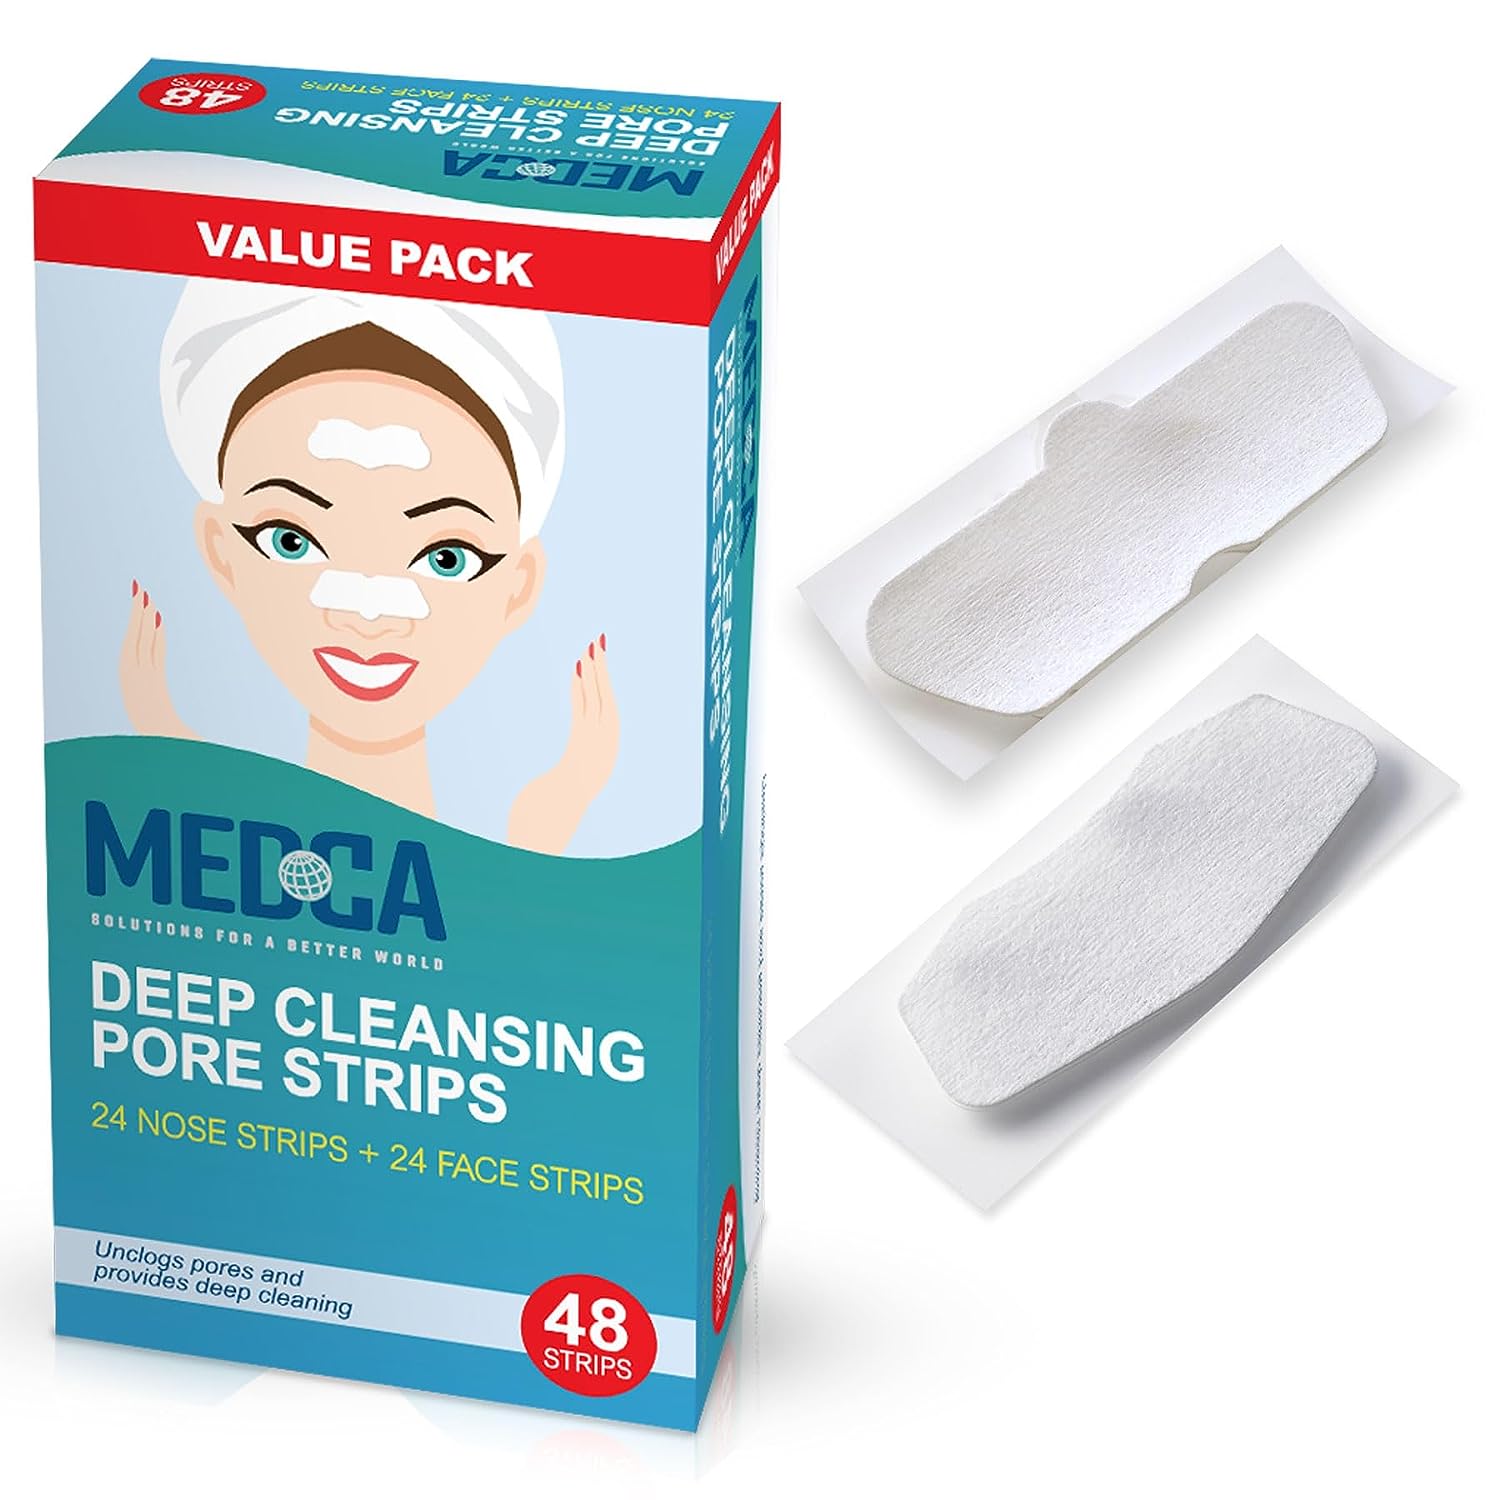 MEDca Deep Cleansing Pore Strips Combo Pack, 48 Count Strips Exfoliants & Scrubs - image 1 of 9